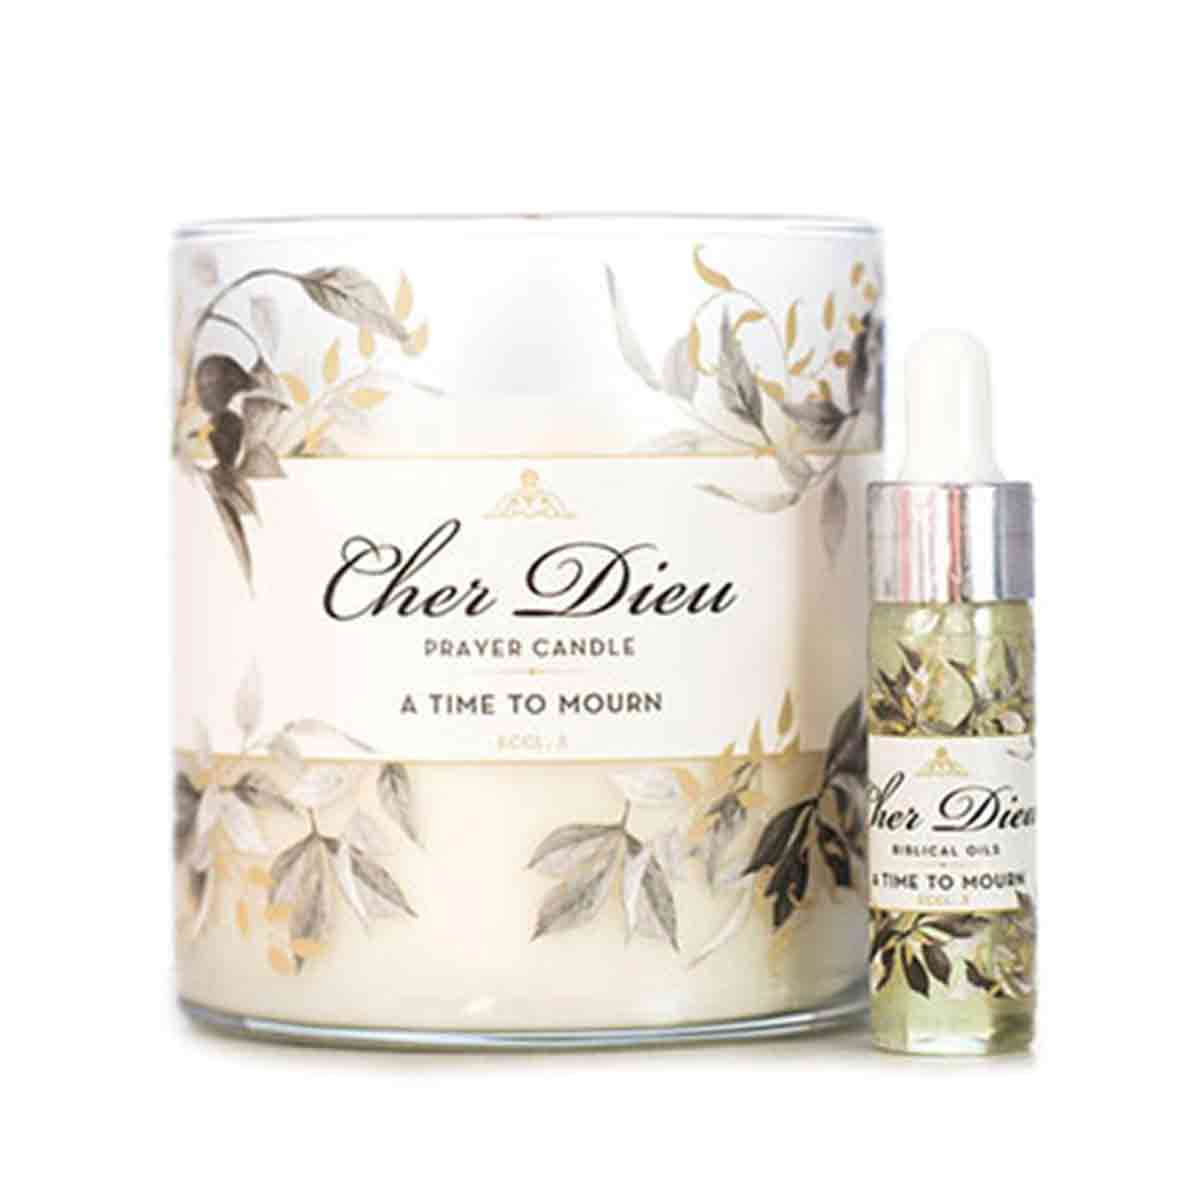 A Time to Mourn Classic Candle Kit Candles Cher Dieu 